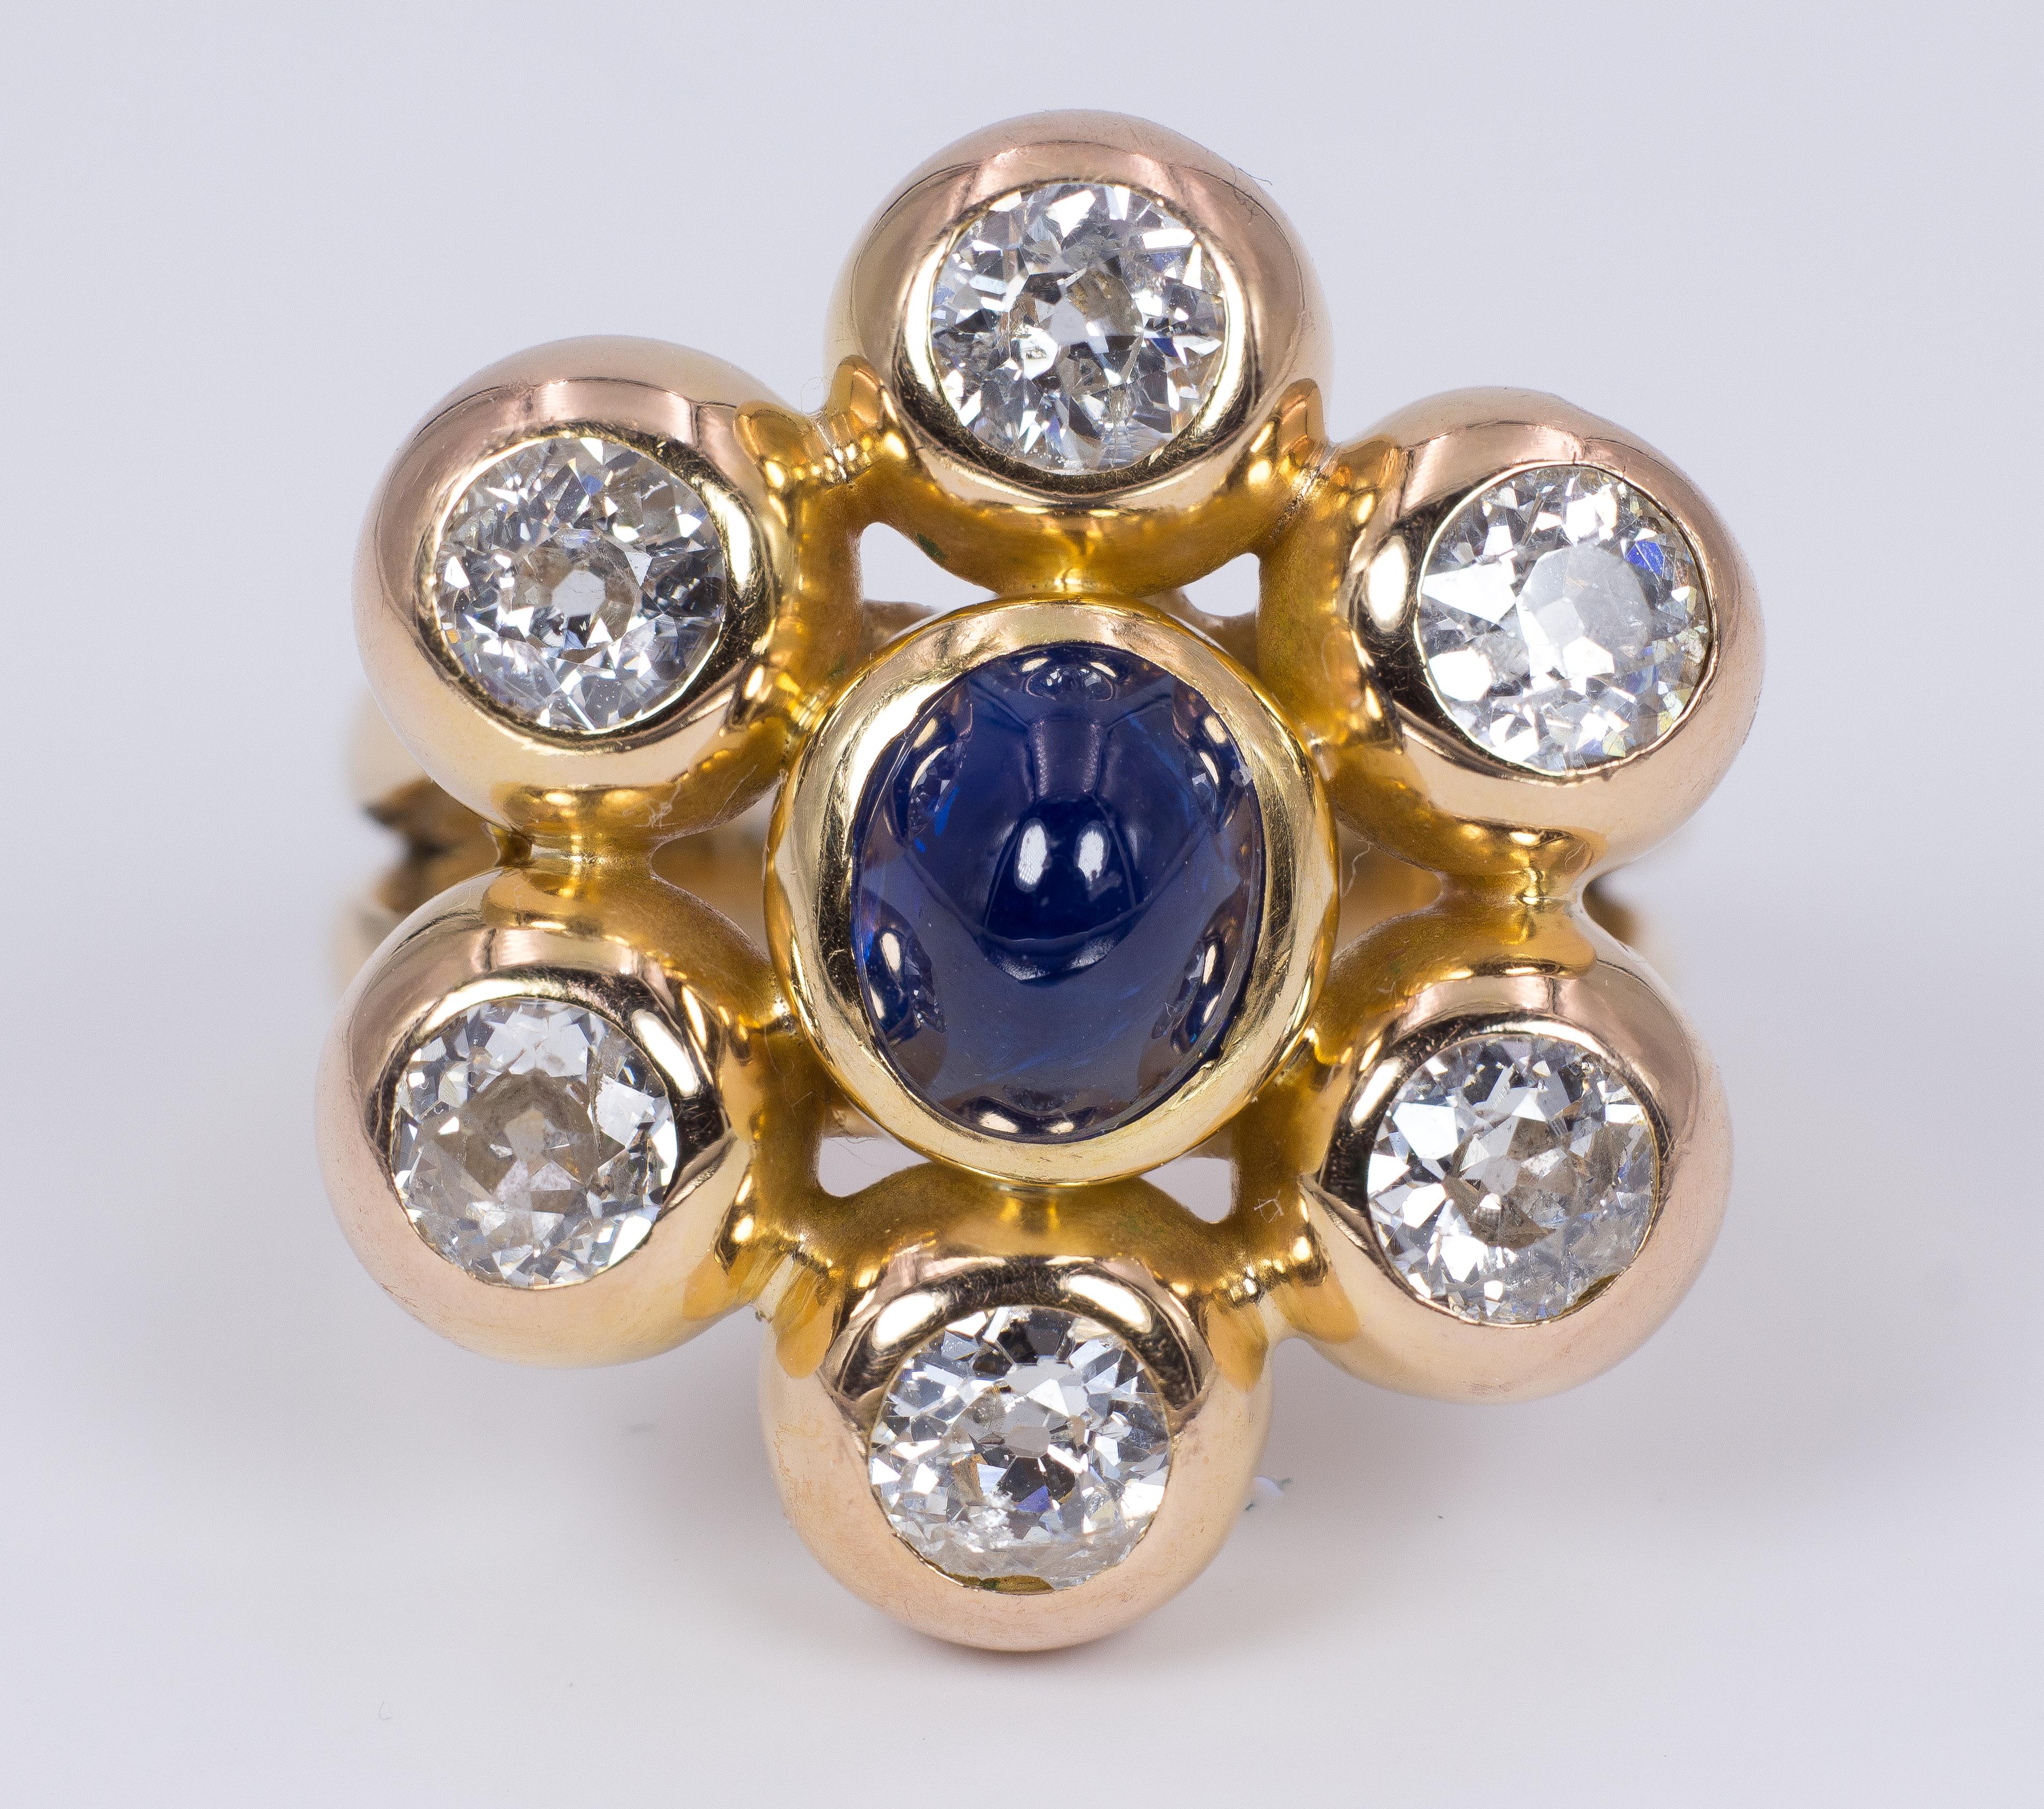 A vintage cluster ring, dating from the 1980s, with the shape of a big and colorful flower. It features a central blue cabochon sapphire, surrounded by six old European cut diamonds, for a total of more 3ct, each one set into a petal-like gold